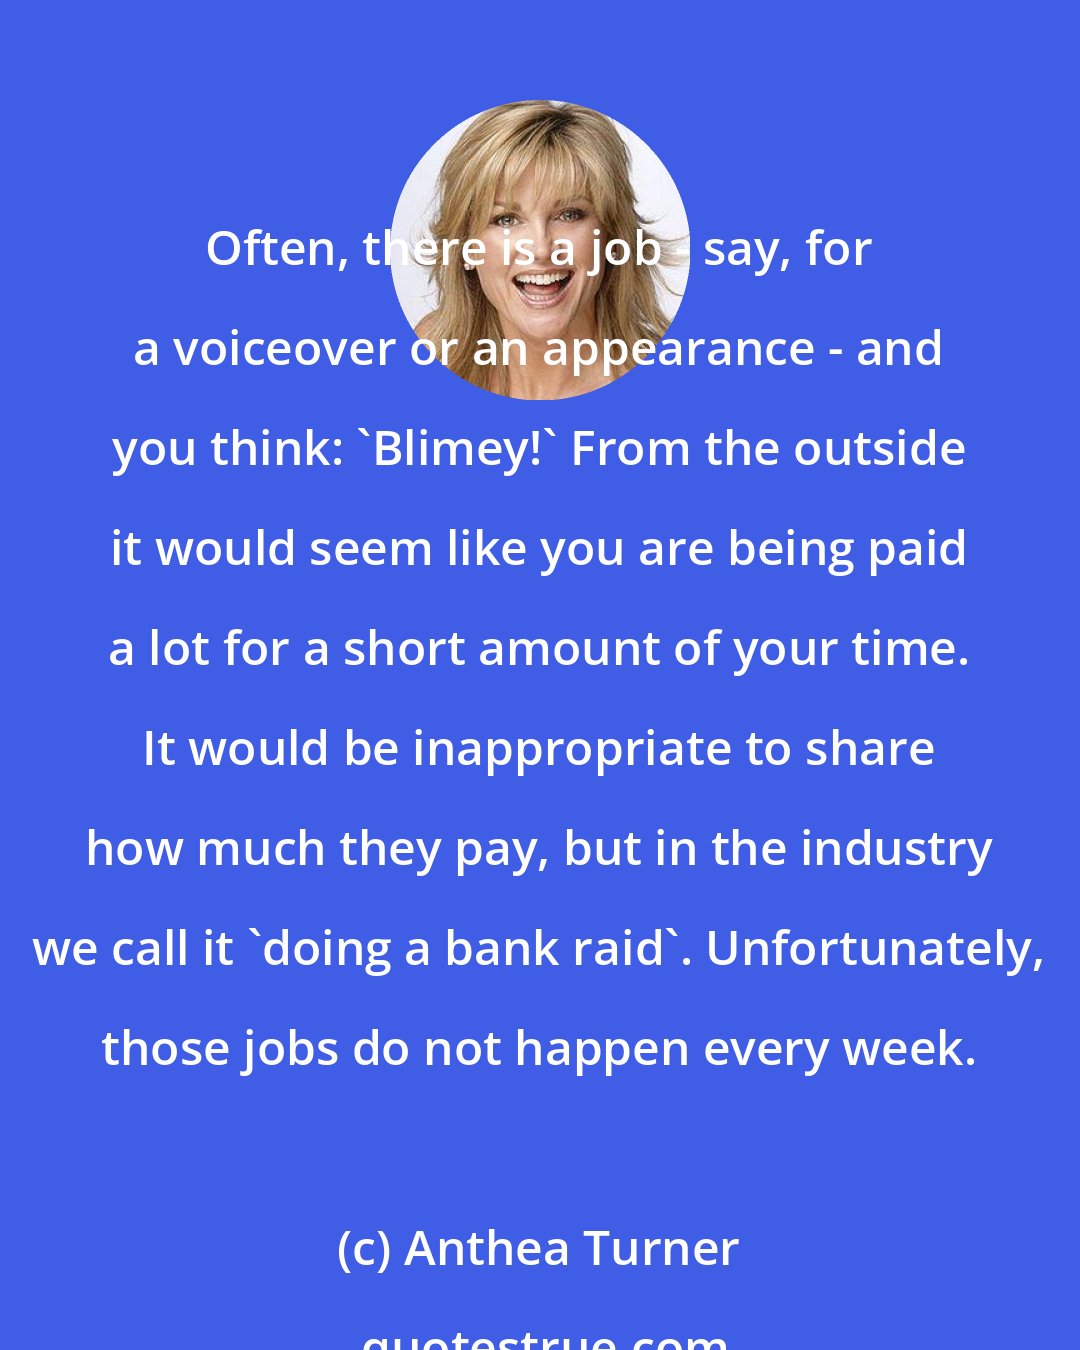 Anthea Turner: Often, there is a job - say, for a voiceover or an appearance - and you think: 'Blimey!' From the outside it would seem like you are being paid a lot for a short amount of your time. It would be inappropriate to share how much they pay, but in the industry we call it 'doing a bank raid'. Unfortunately, those jobs do not happen every week.